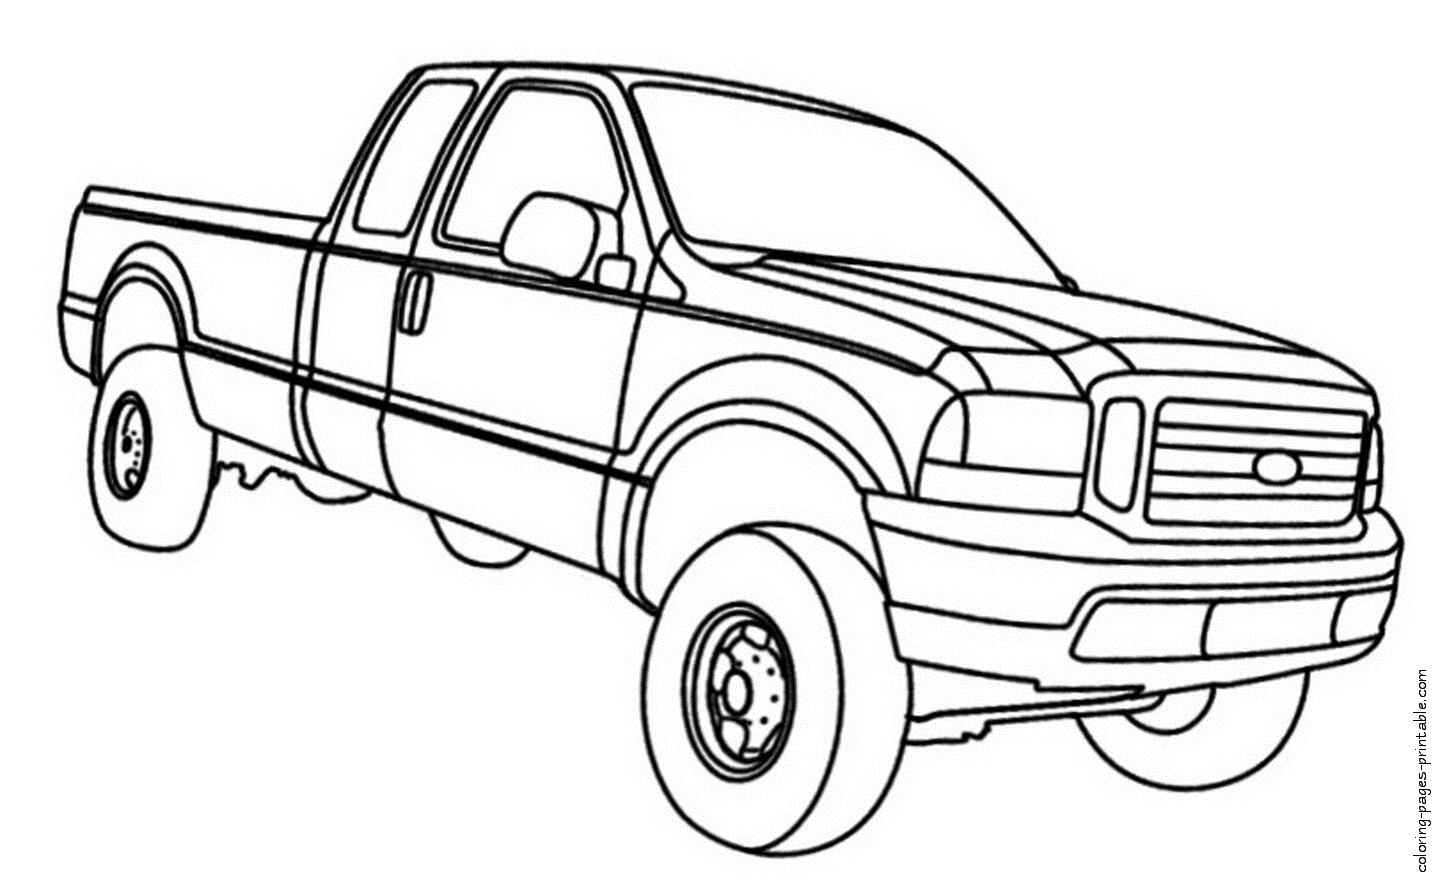 Pickup truck. Ford coloring page || COLORING-PAGES-PRINTABLE.COM